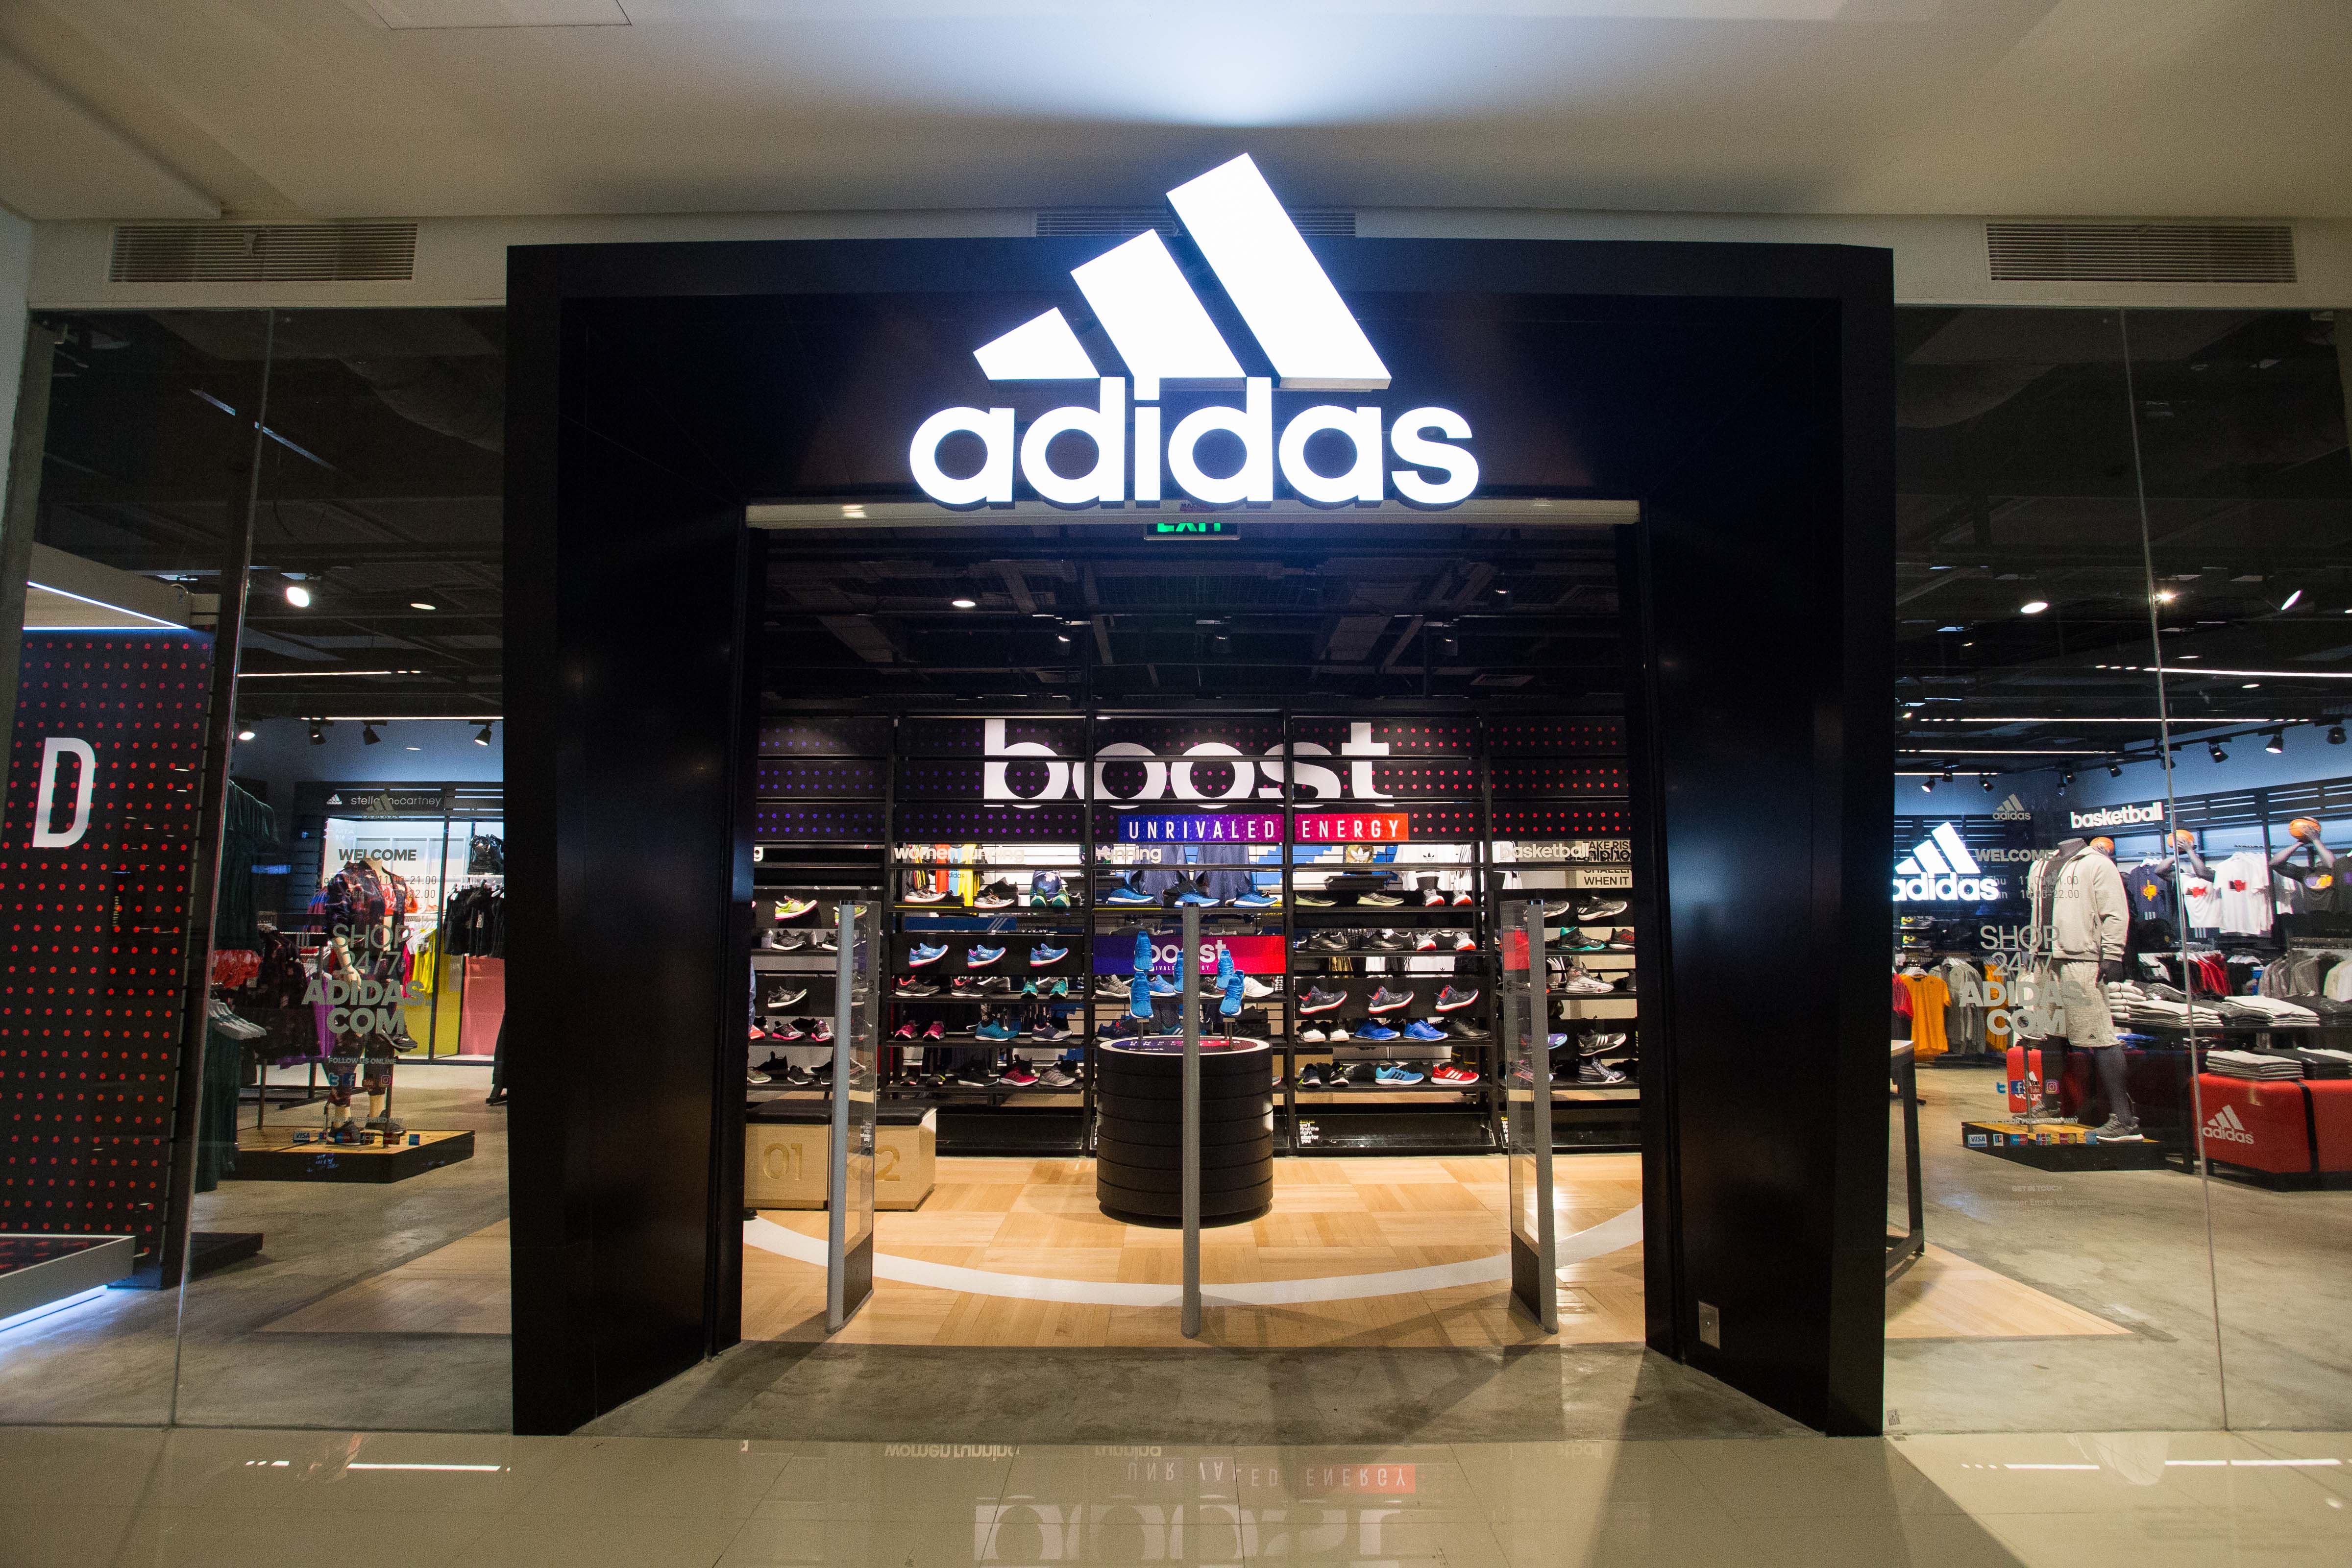 adidas factory outlet philippines